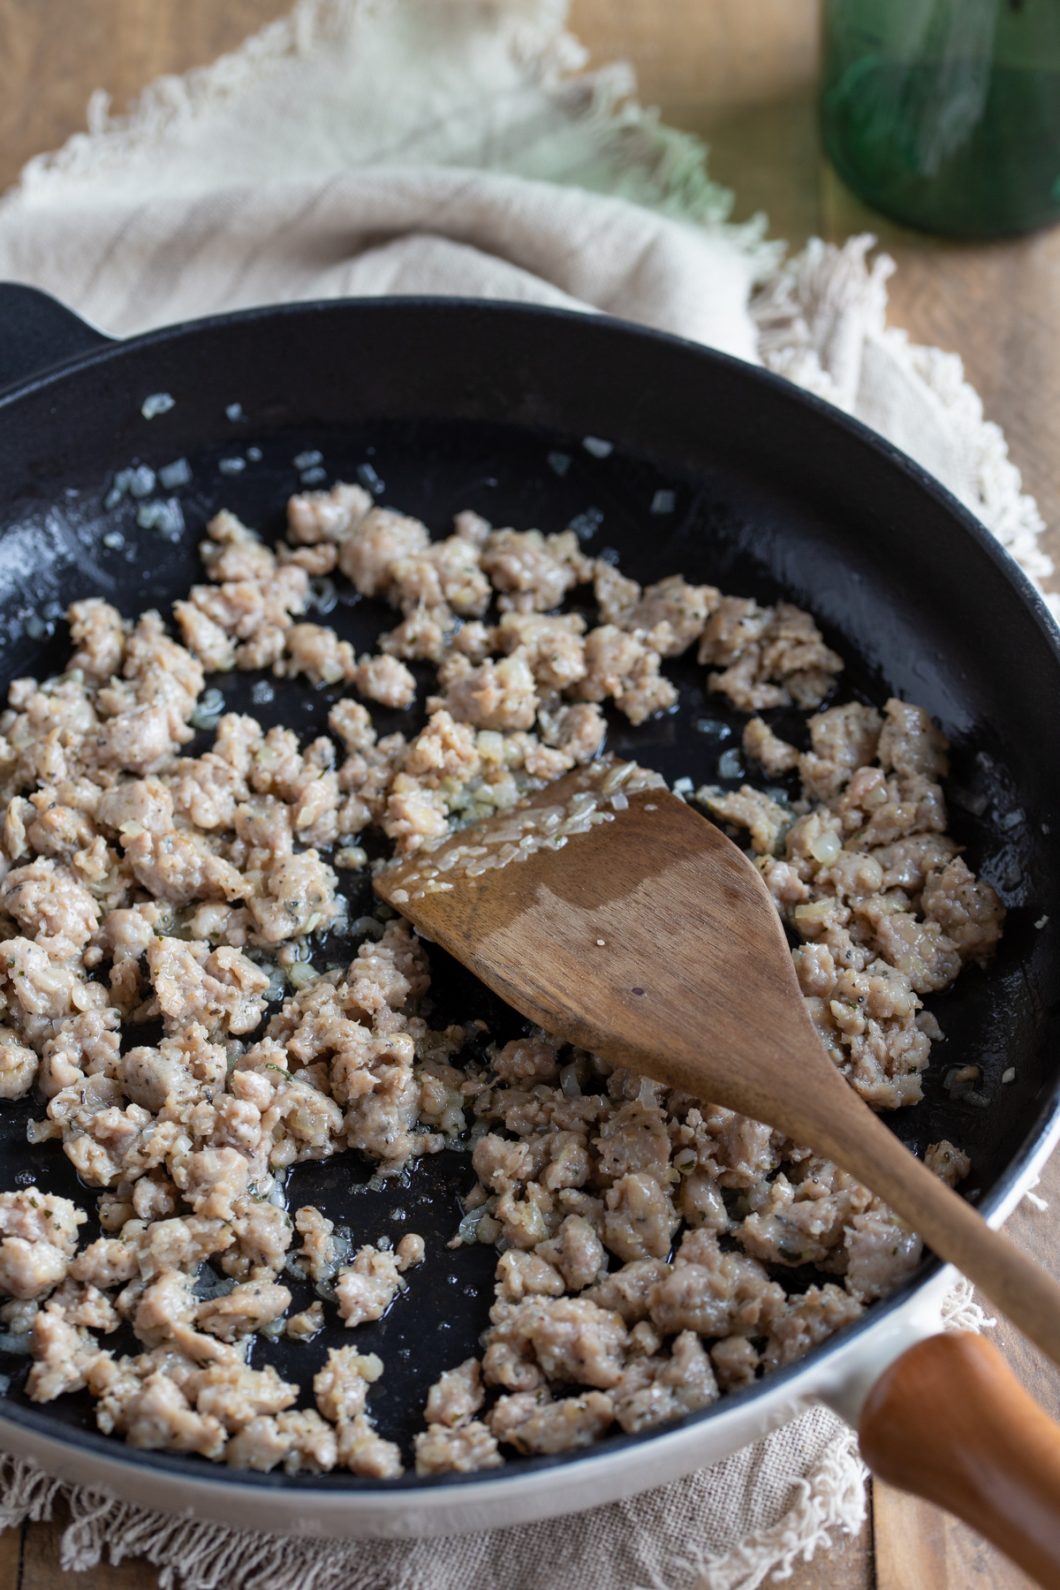 Sauté onion and sausage in a skillet.